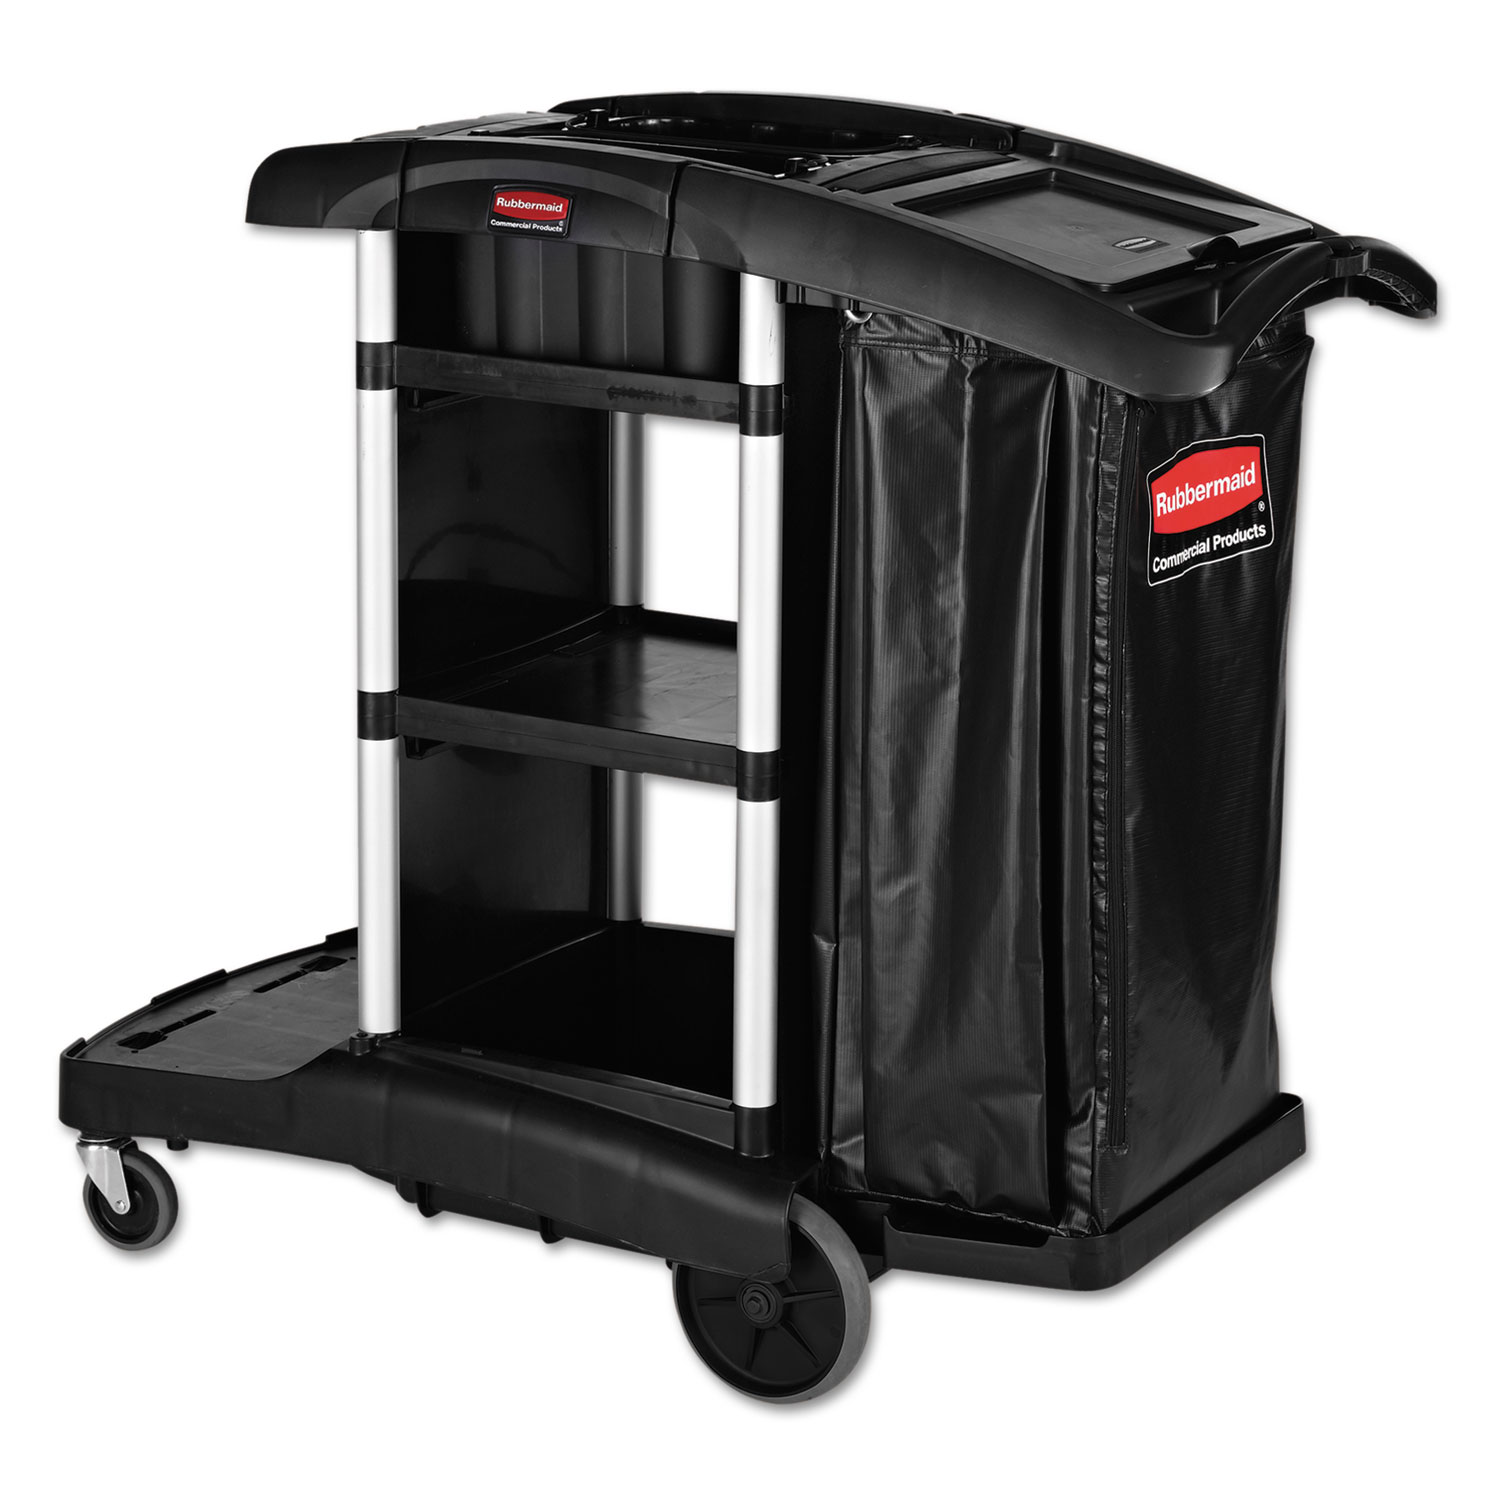 Executive High Capacity Janitorial Cleaning Cart, 22.5w x 38.5d x 20.5h, Black